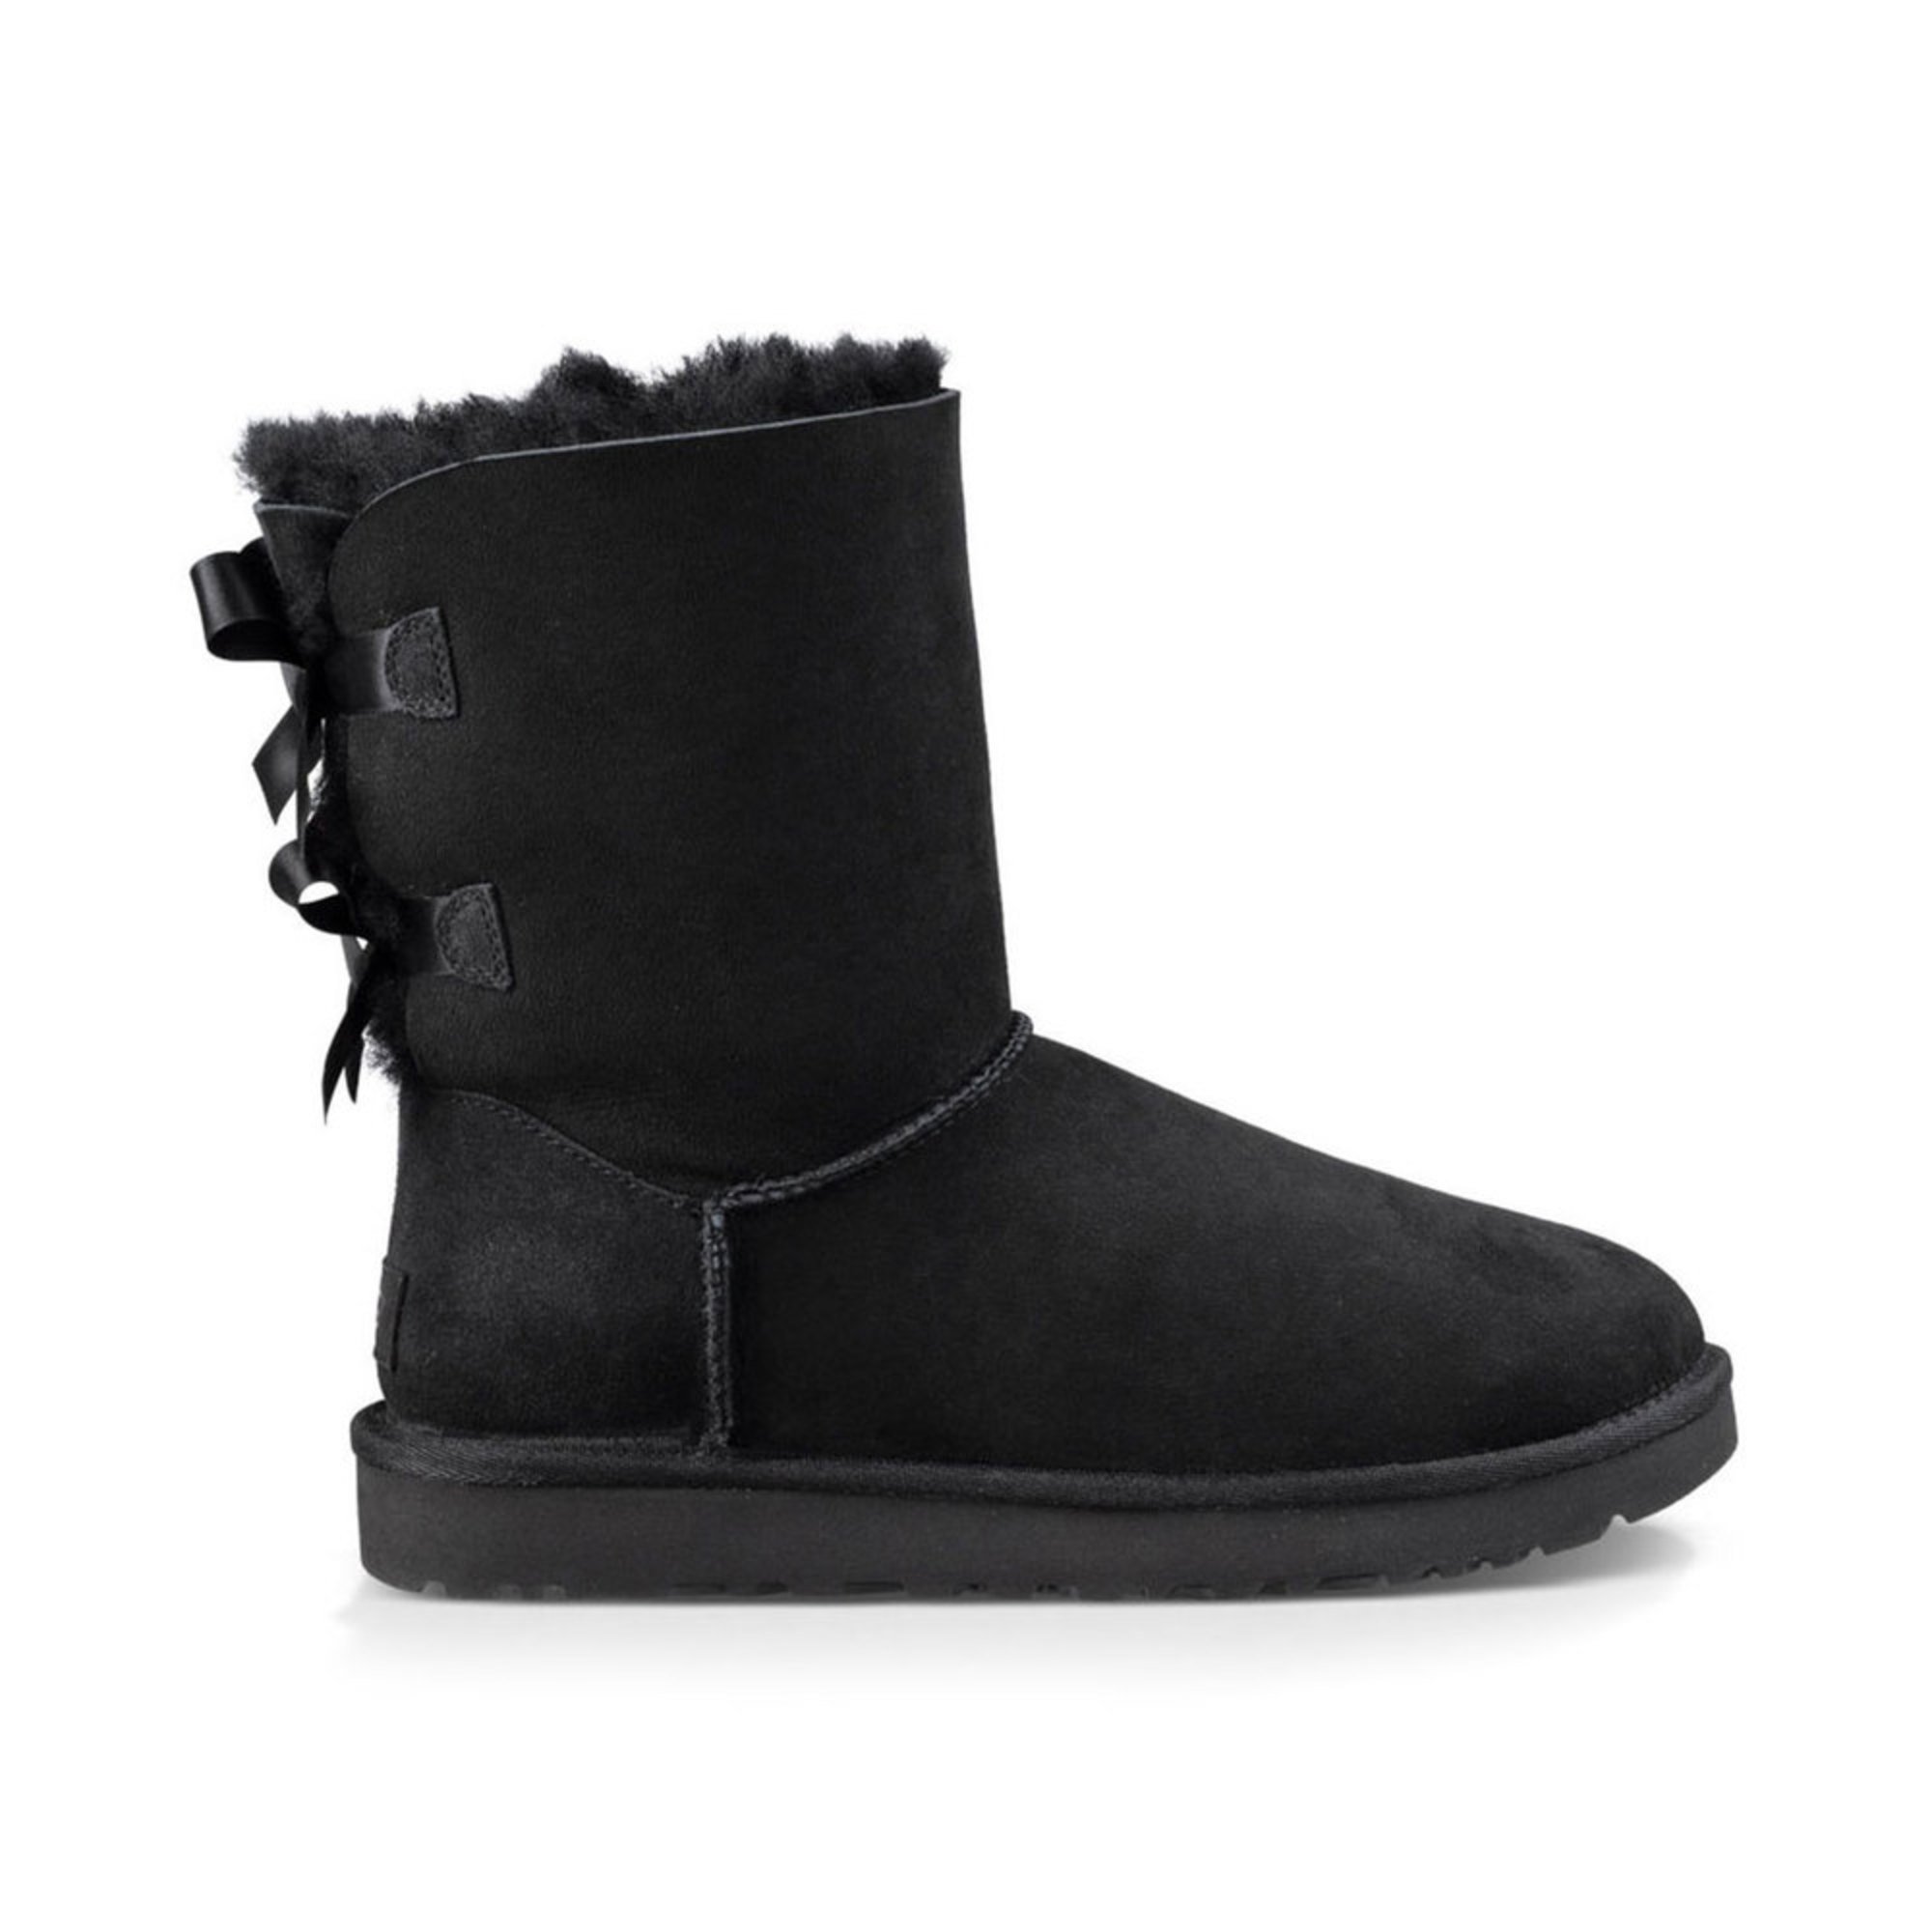 ugg women's bailey bow boots